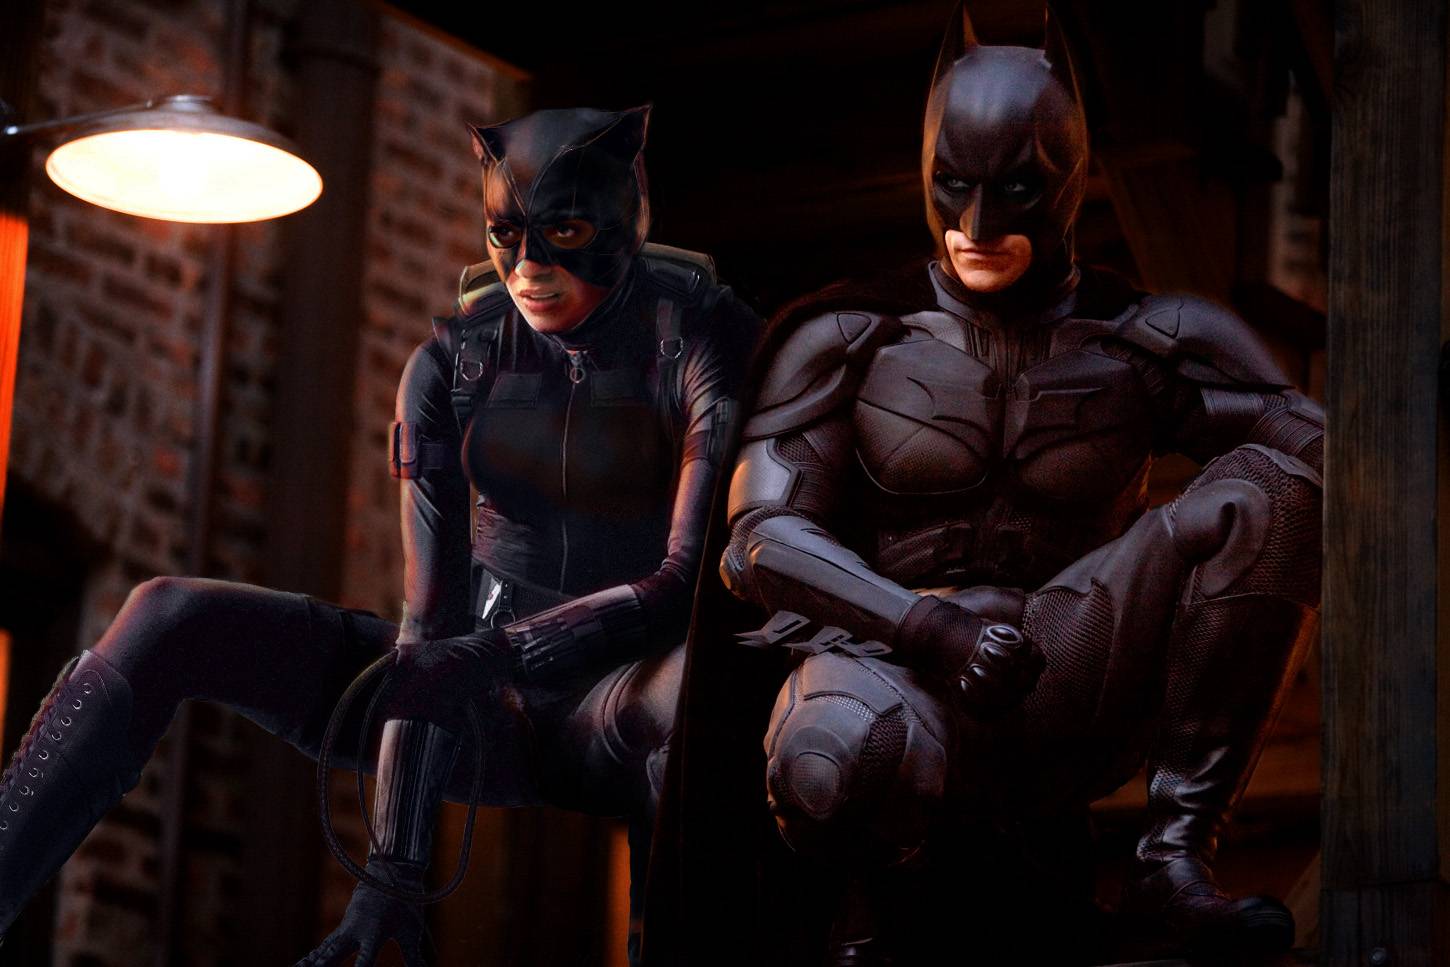 Free download batman and catwoman batman and catwoman image [1450x967] for your Desktop, Mobile & Tablet. Explore Batman and Catwoman Wallpaper. Batman and Catwoman Wallpaper, Batman Arkham City Catwoman